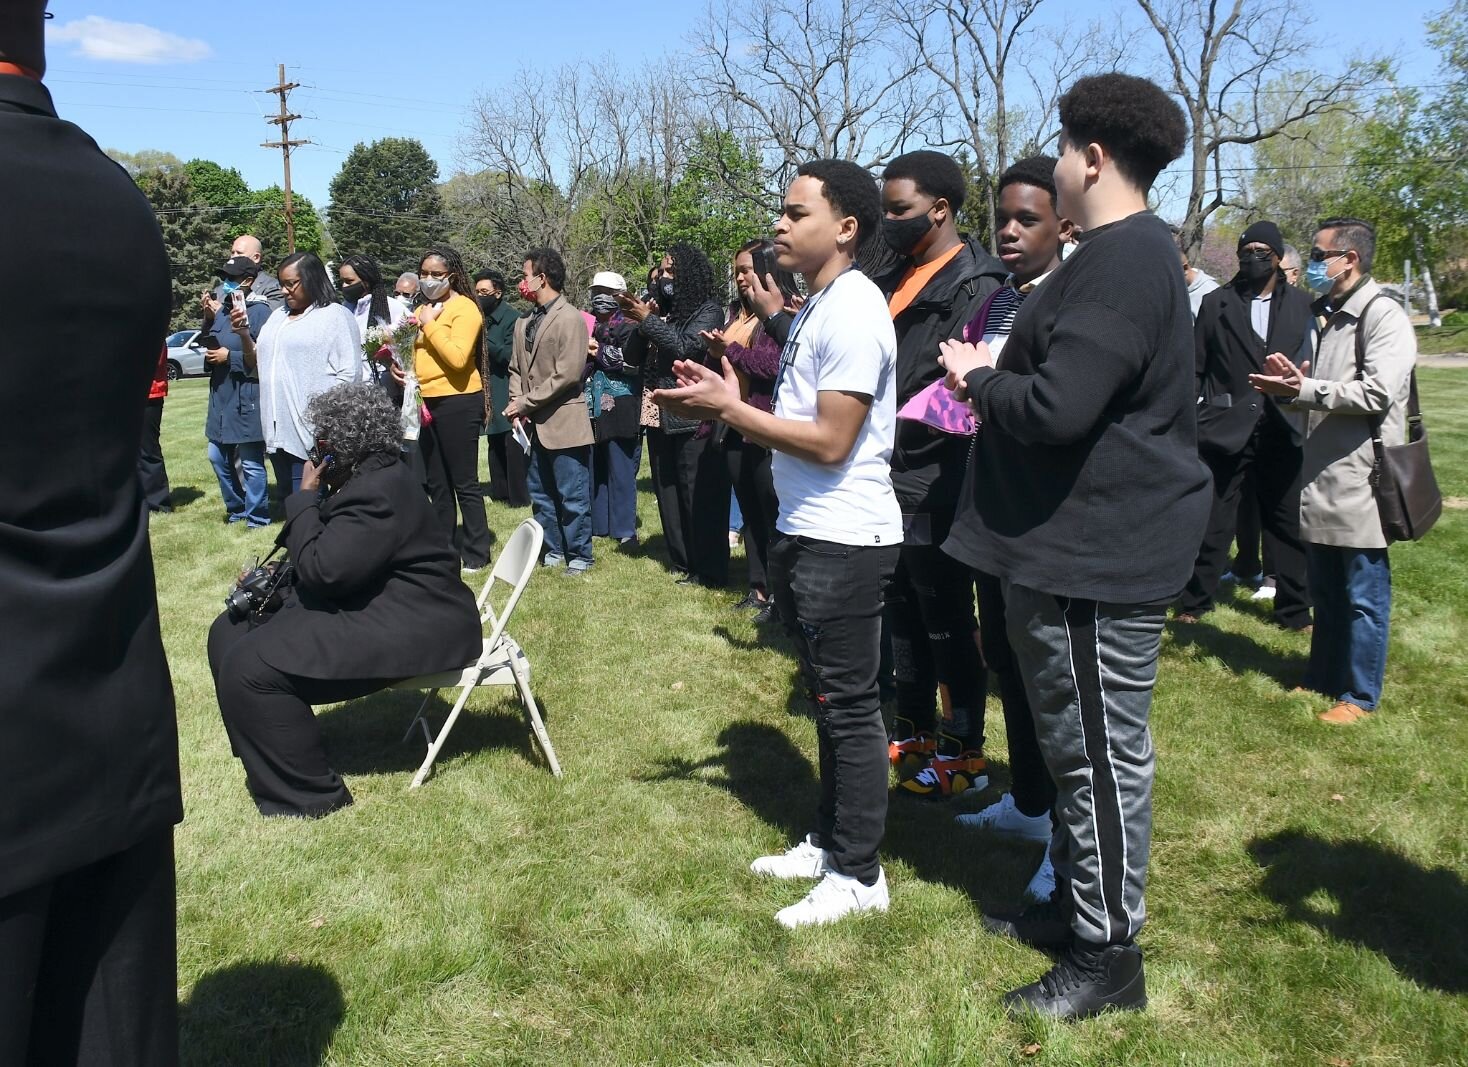 Family and friends of Maude Bristol-Perry watch the festivities s on May 8, during the day of the unveiling of Honorary Mayor Maude Bristol-Perry Avenue.